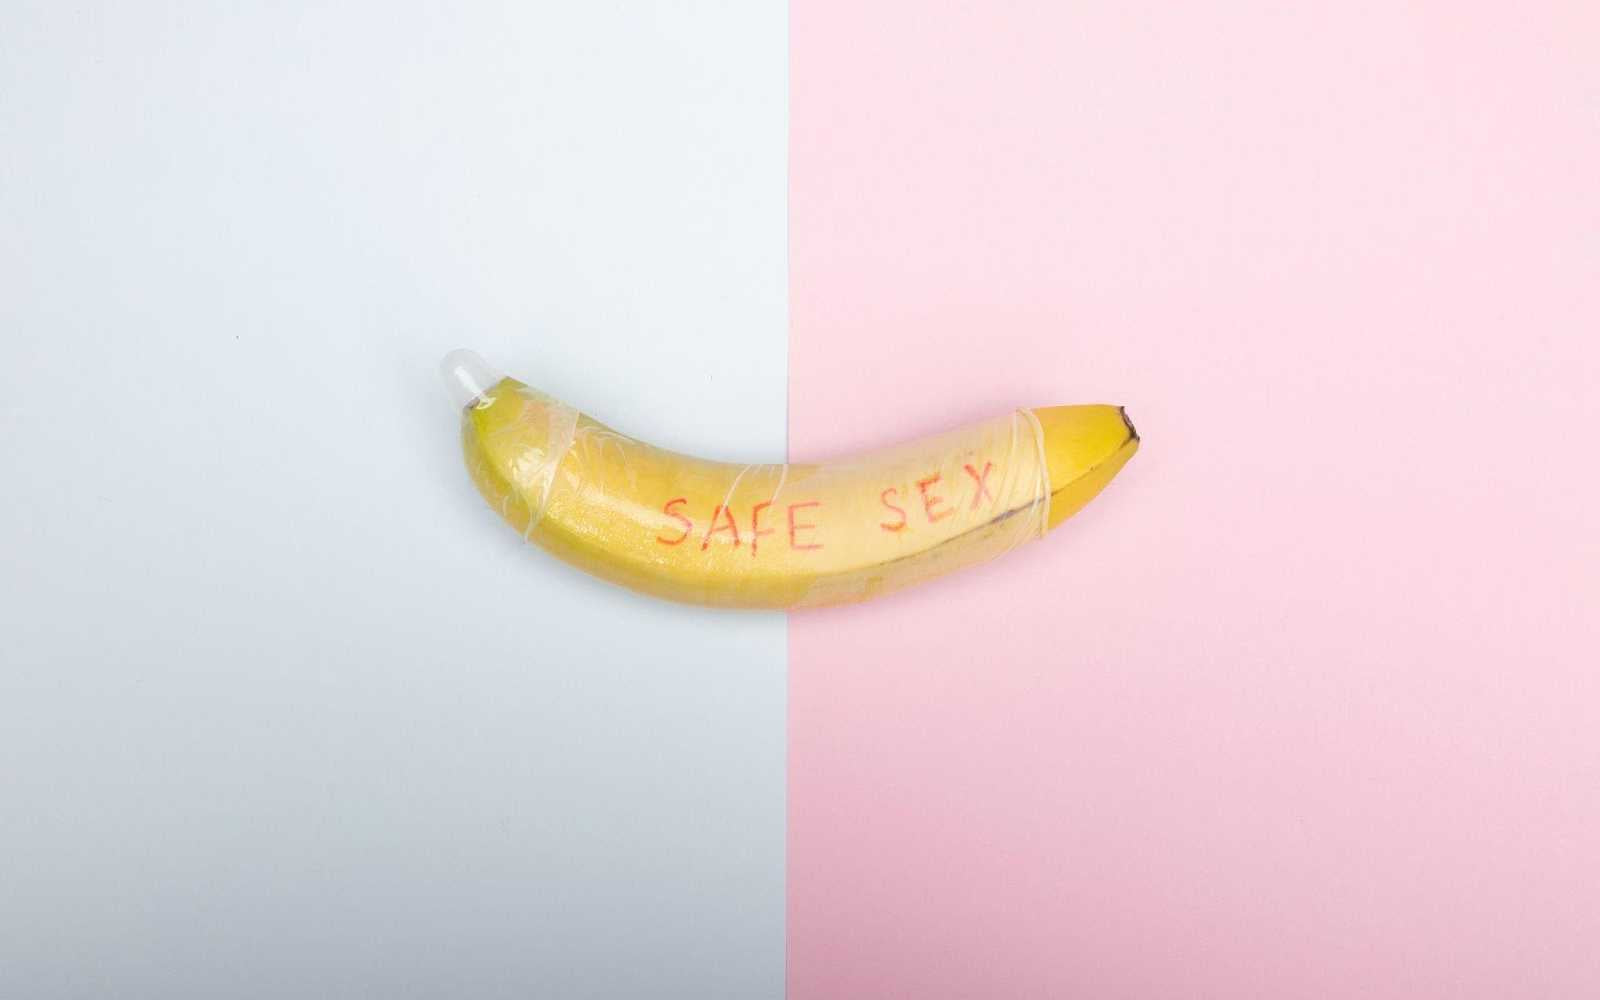 Image of a banana with Safe Sex written on it with a split grey and pink background.